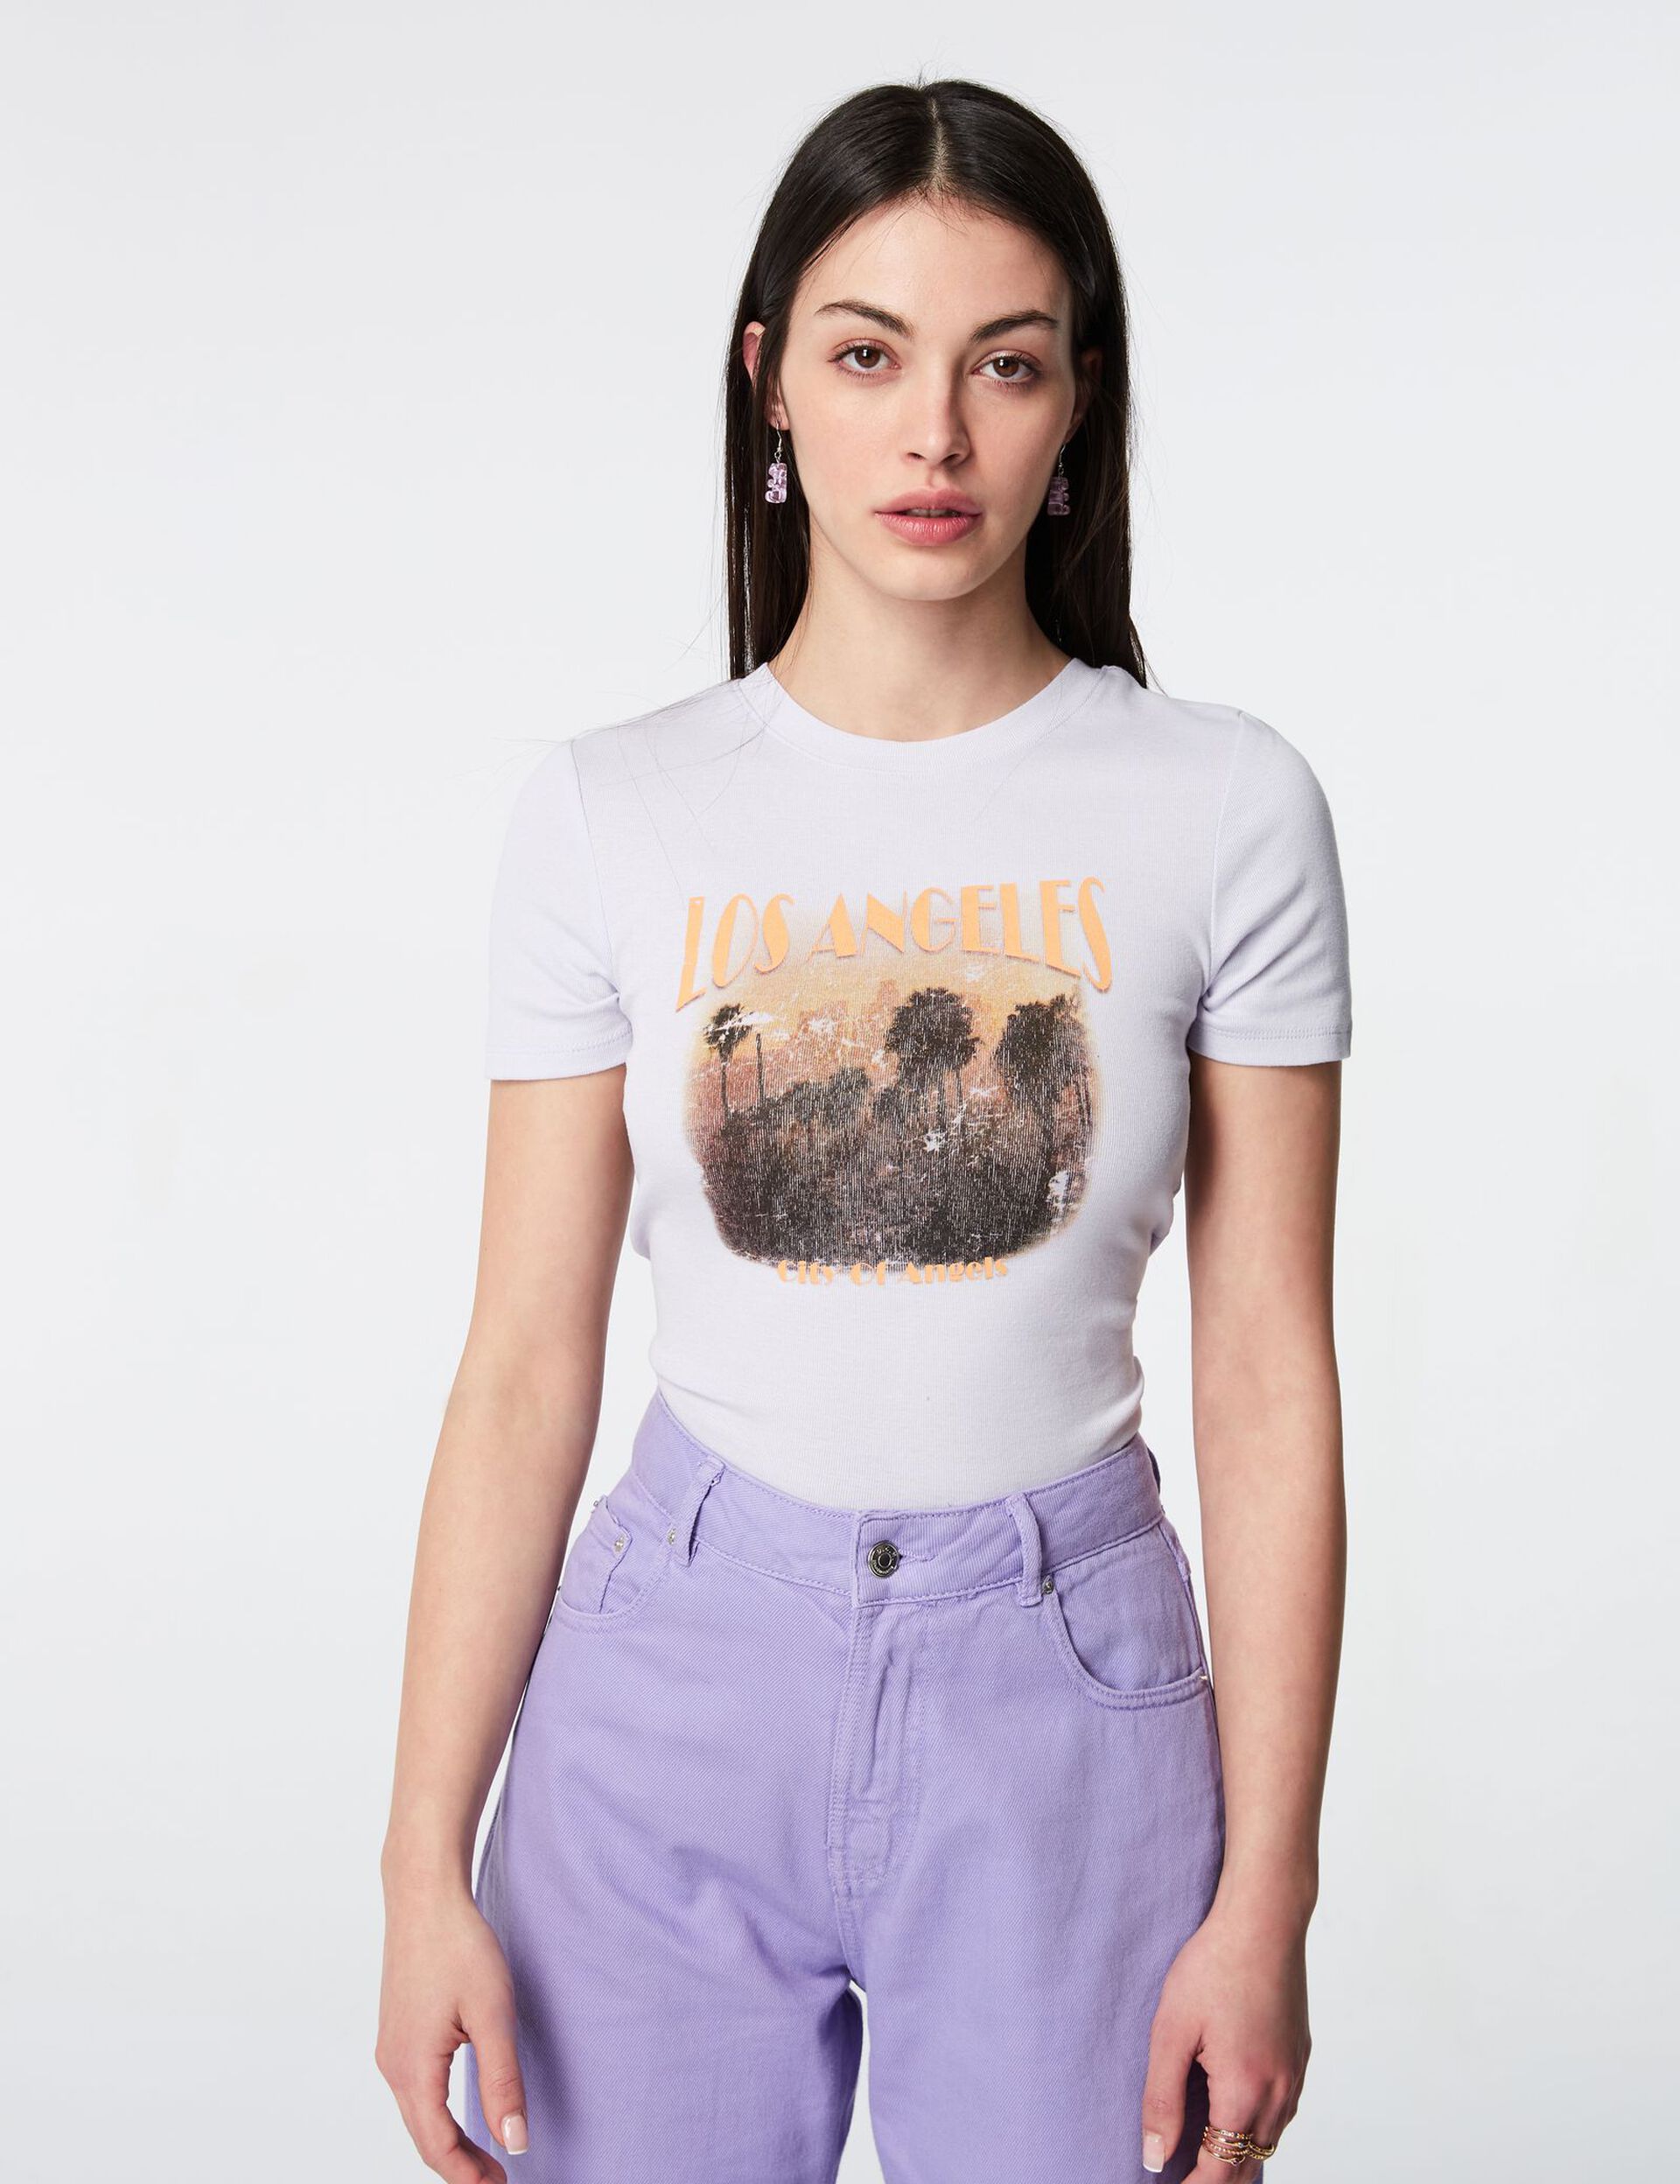 Los Angeles cropped T-shirt